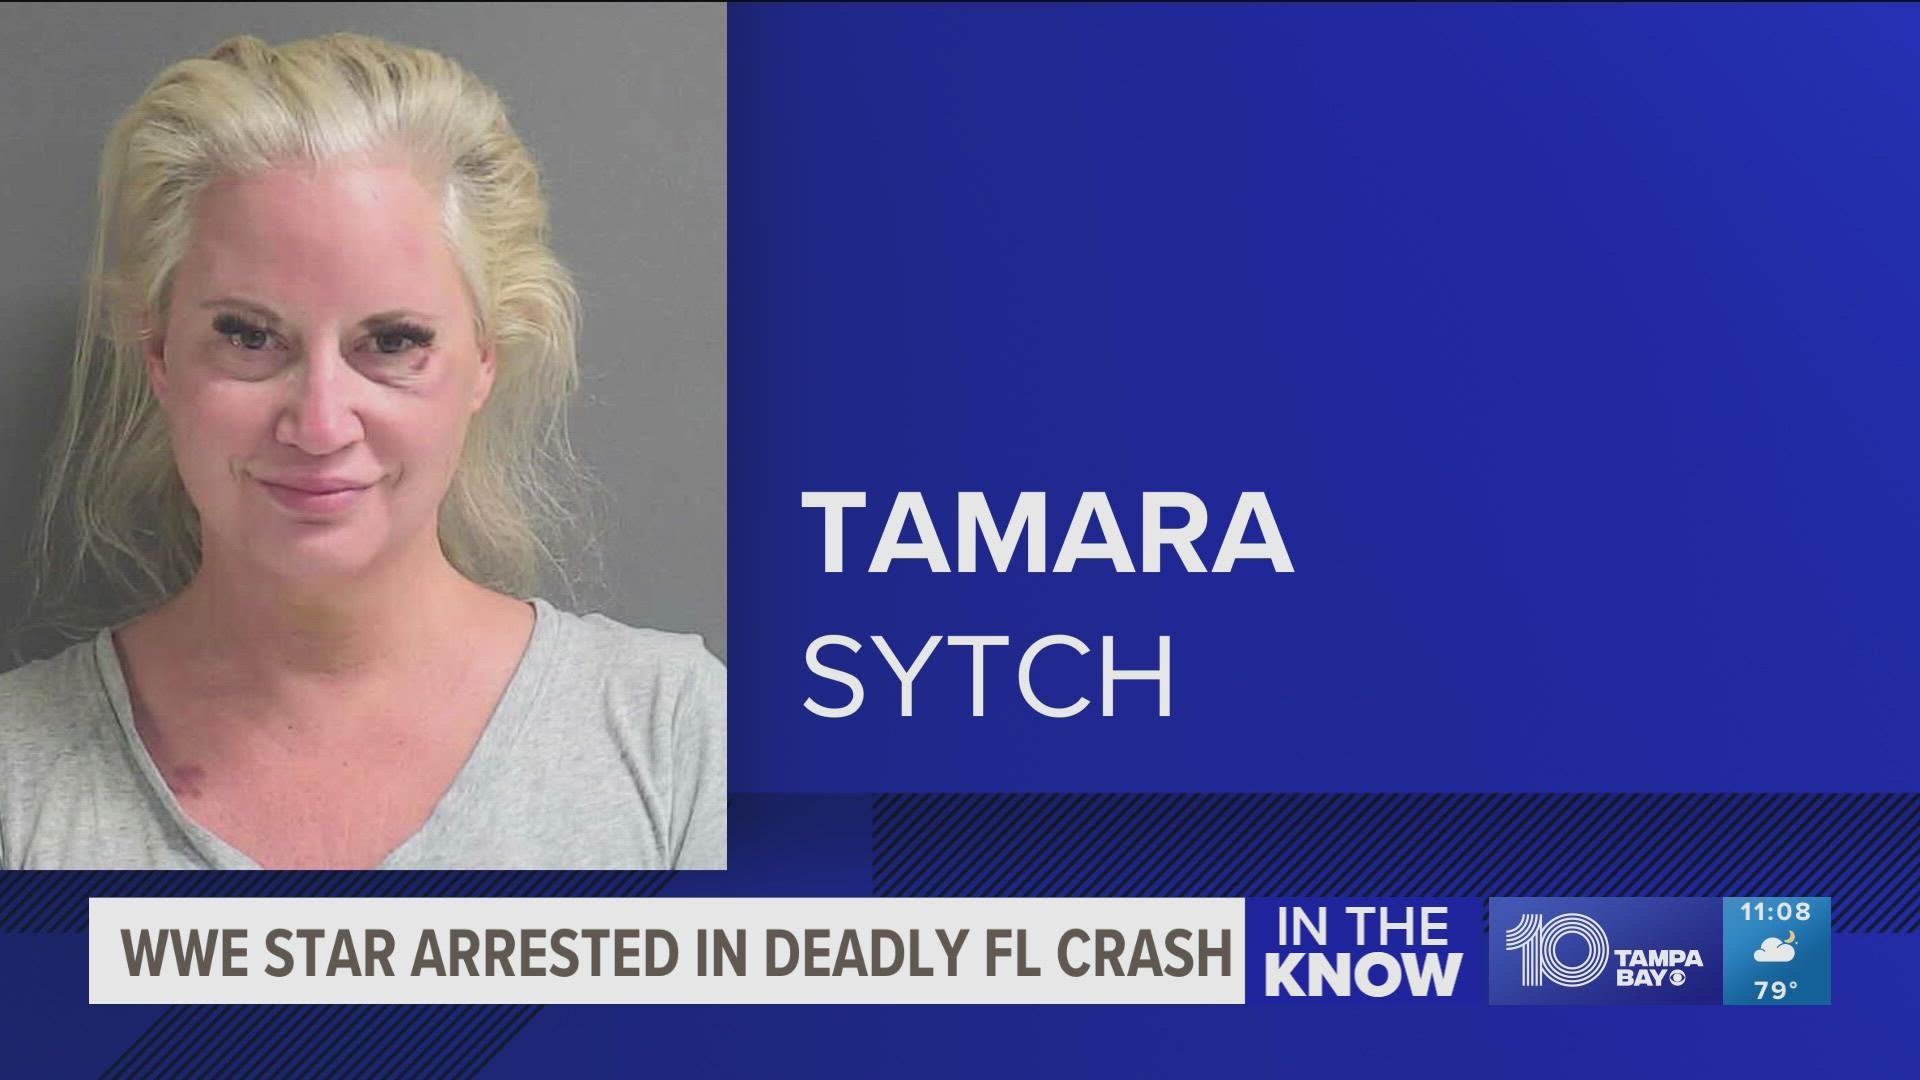 Toxicology results revealed that Tamara Lynn Sytch had a 0.280 blood-alcohol level — three times the legal limit, according to police.